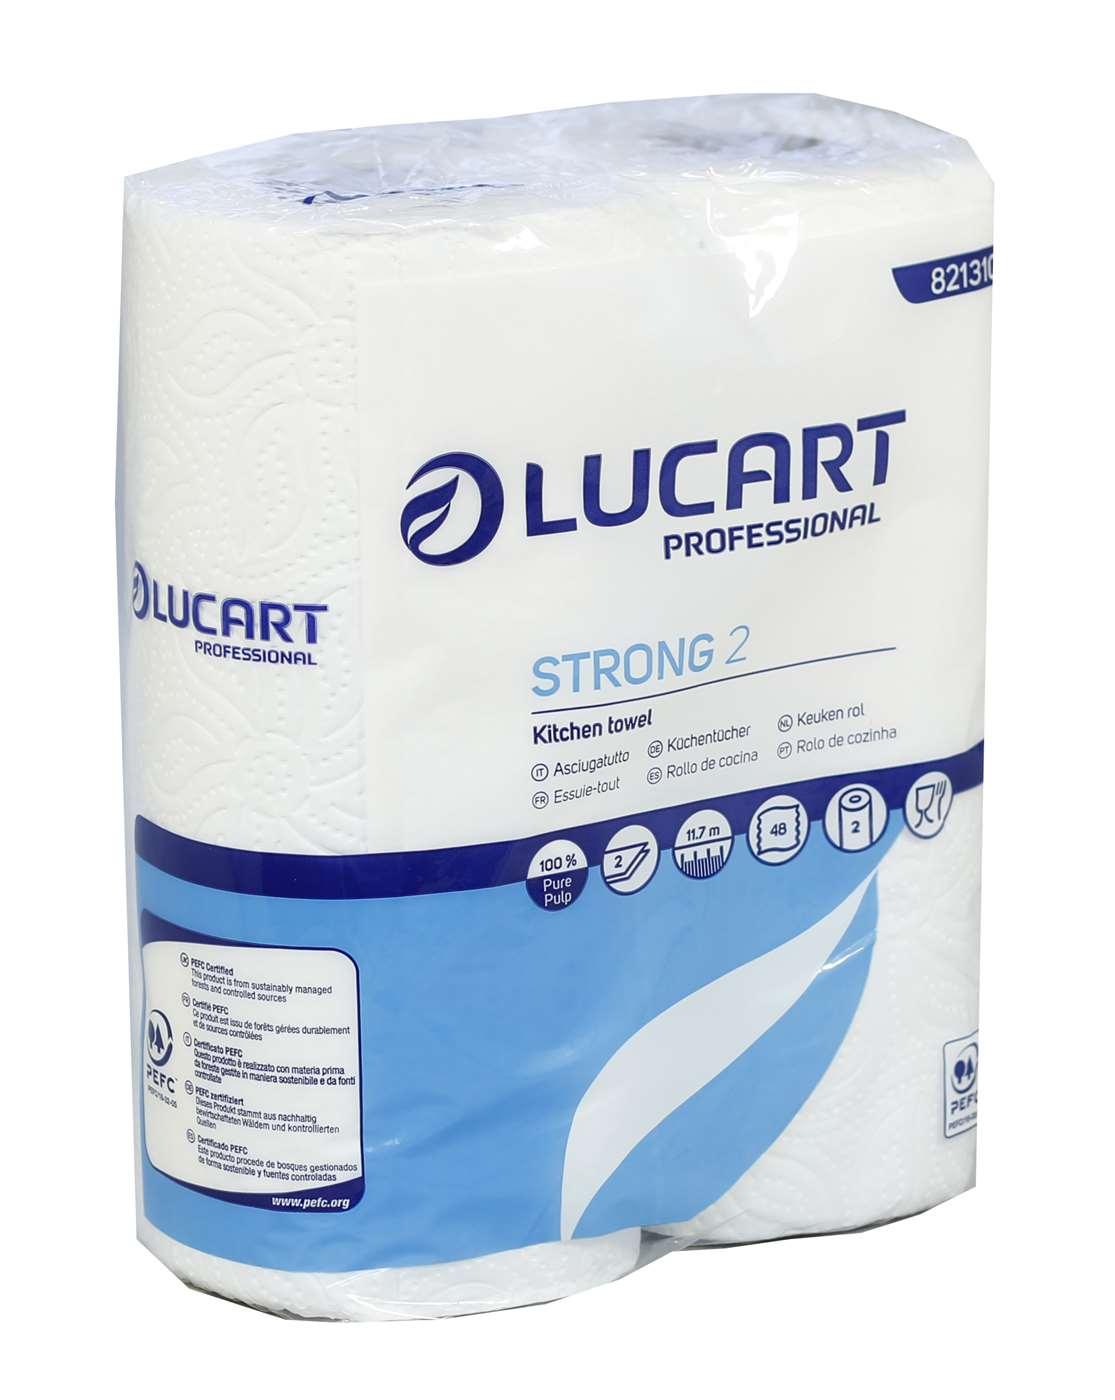 Strong Lucart 2ply Kitchen Rolls - (Twin Pack) - (48 Sheets) - Vending Superstore